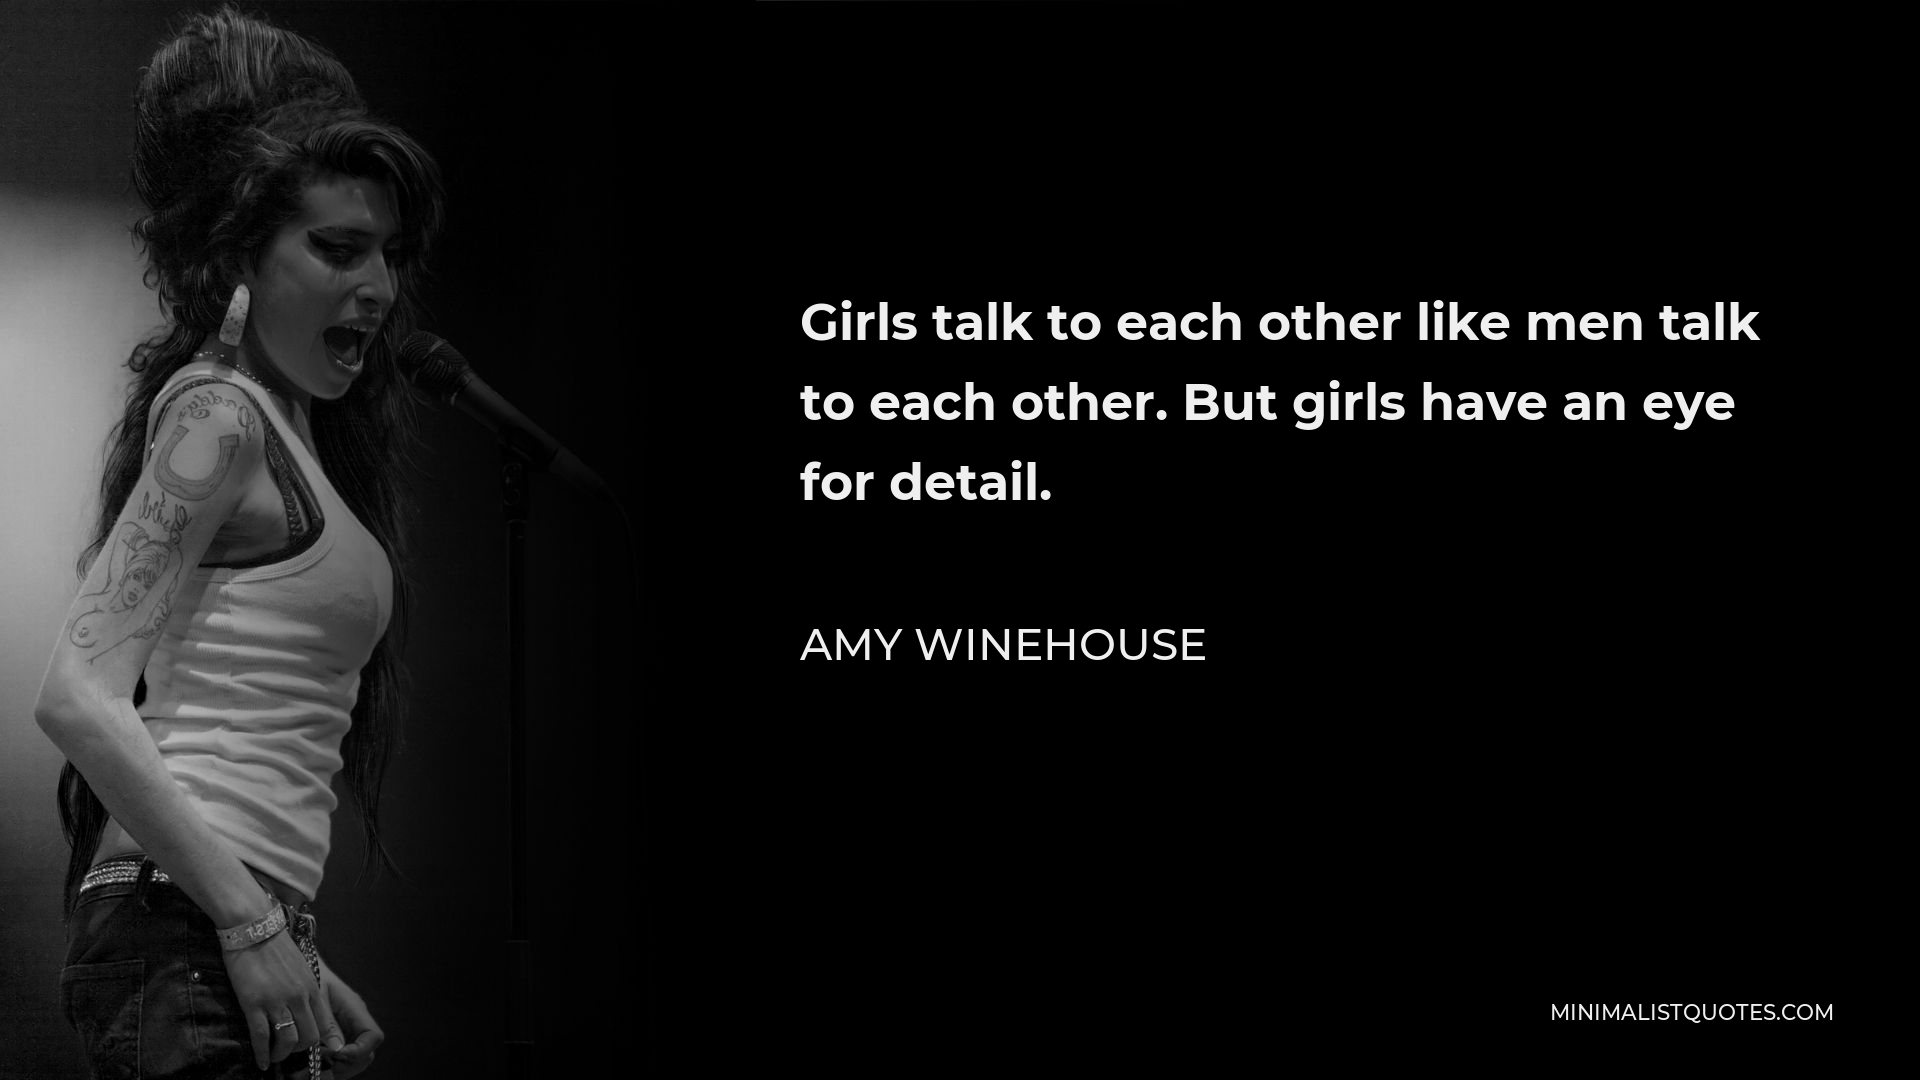 Amy Winehouse Quote - Girls talk to each other like men talk to each other. But girls have an eye for detail.